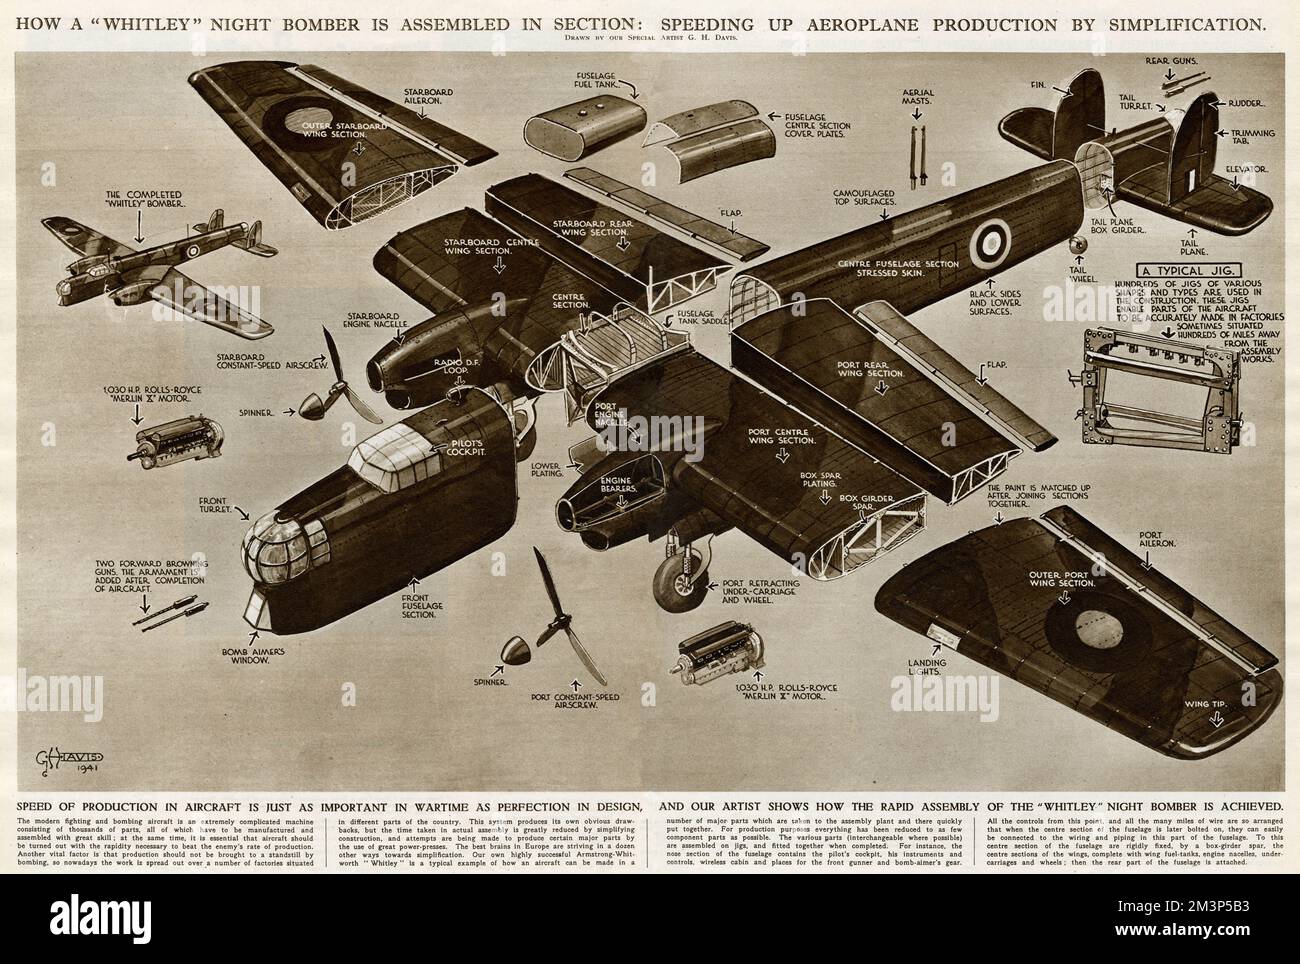 How a Whitley night bomber is assembled in section, speeding up aeroplane production by simplification during the Second World War.       Date: 1941 Stock Photo